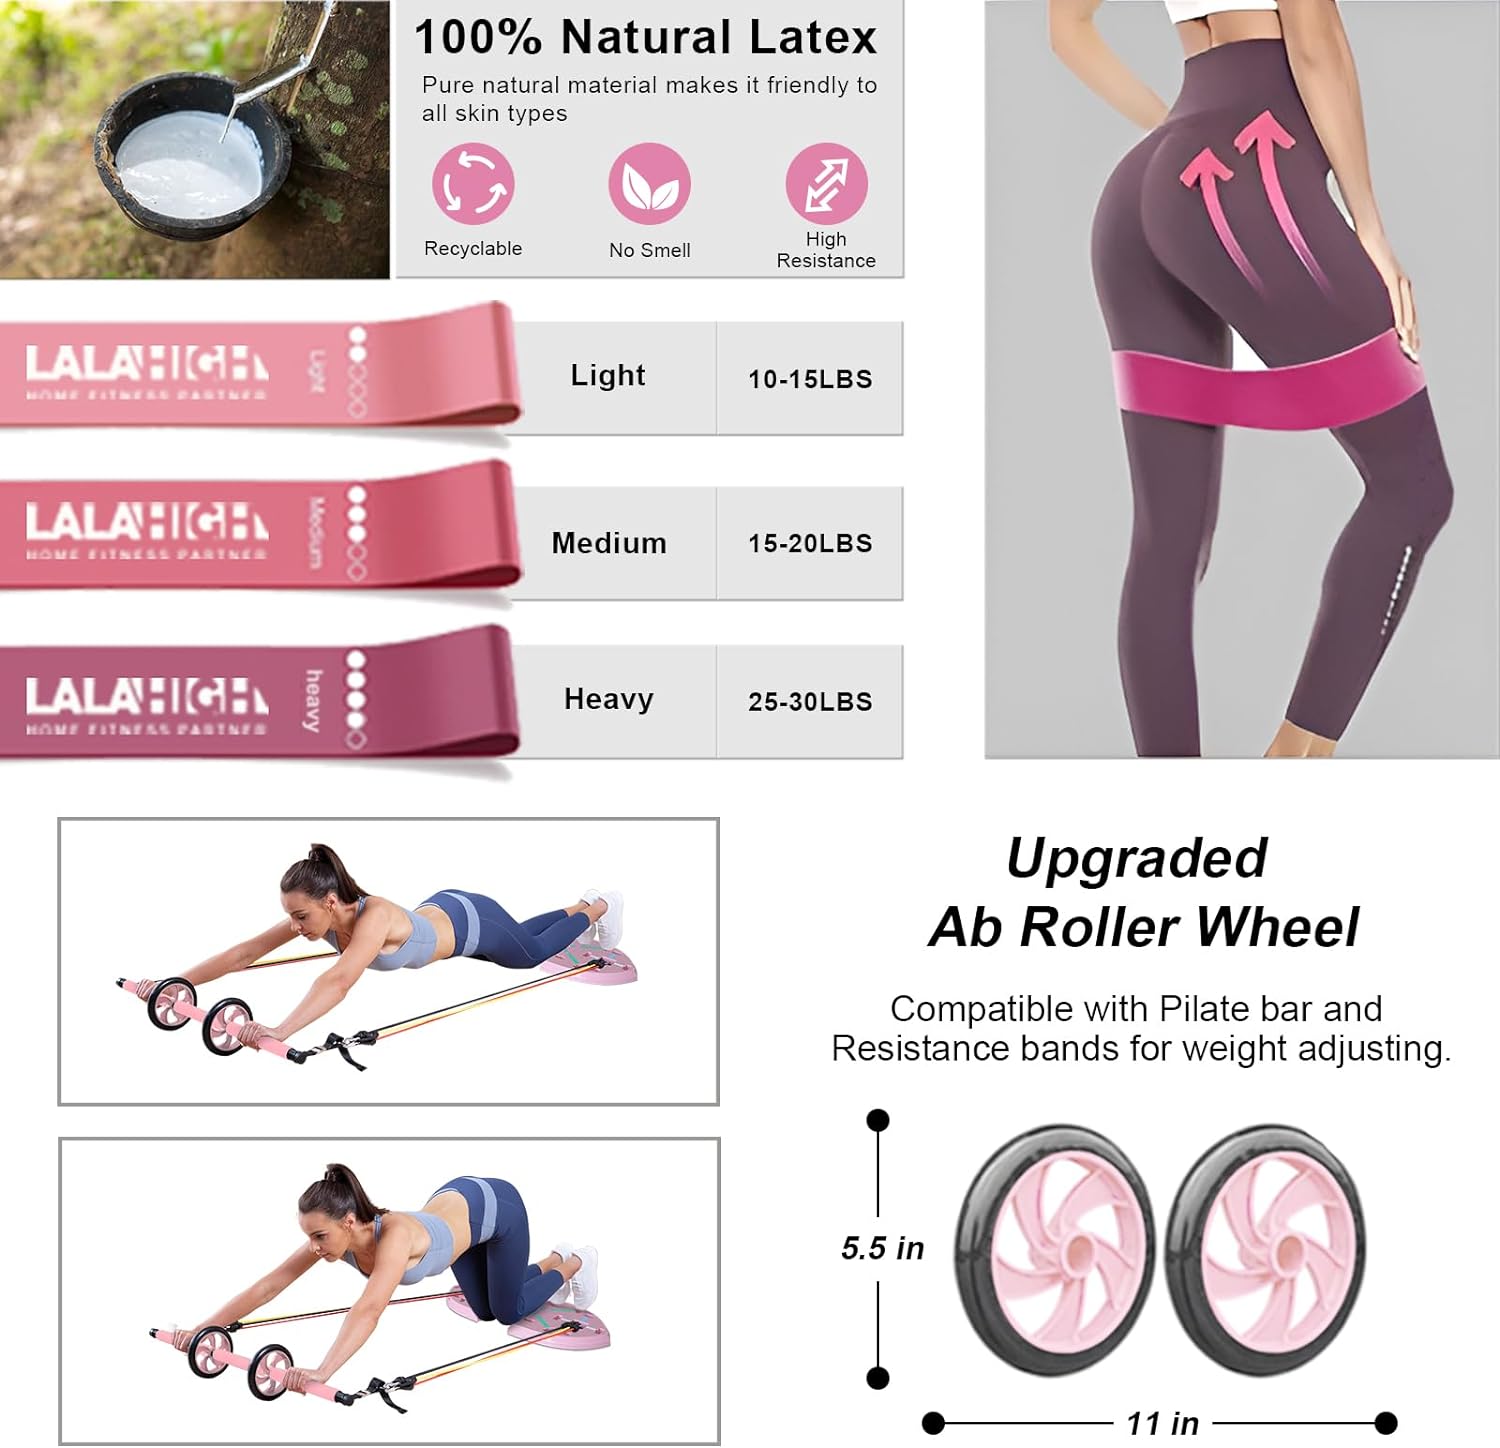 LALAHIGH Home Workout Equipment for Women, Multifunction Push Up Board, Portable Home Gym System with Resistance Bands,Ab Roller Wheel, and 20 Gym Accessories, Professional Strength Training Exercise Equipment For Body Shaping